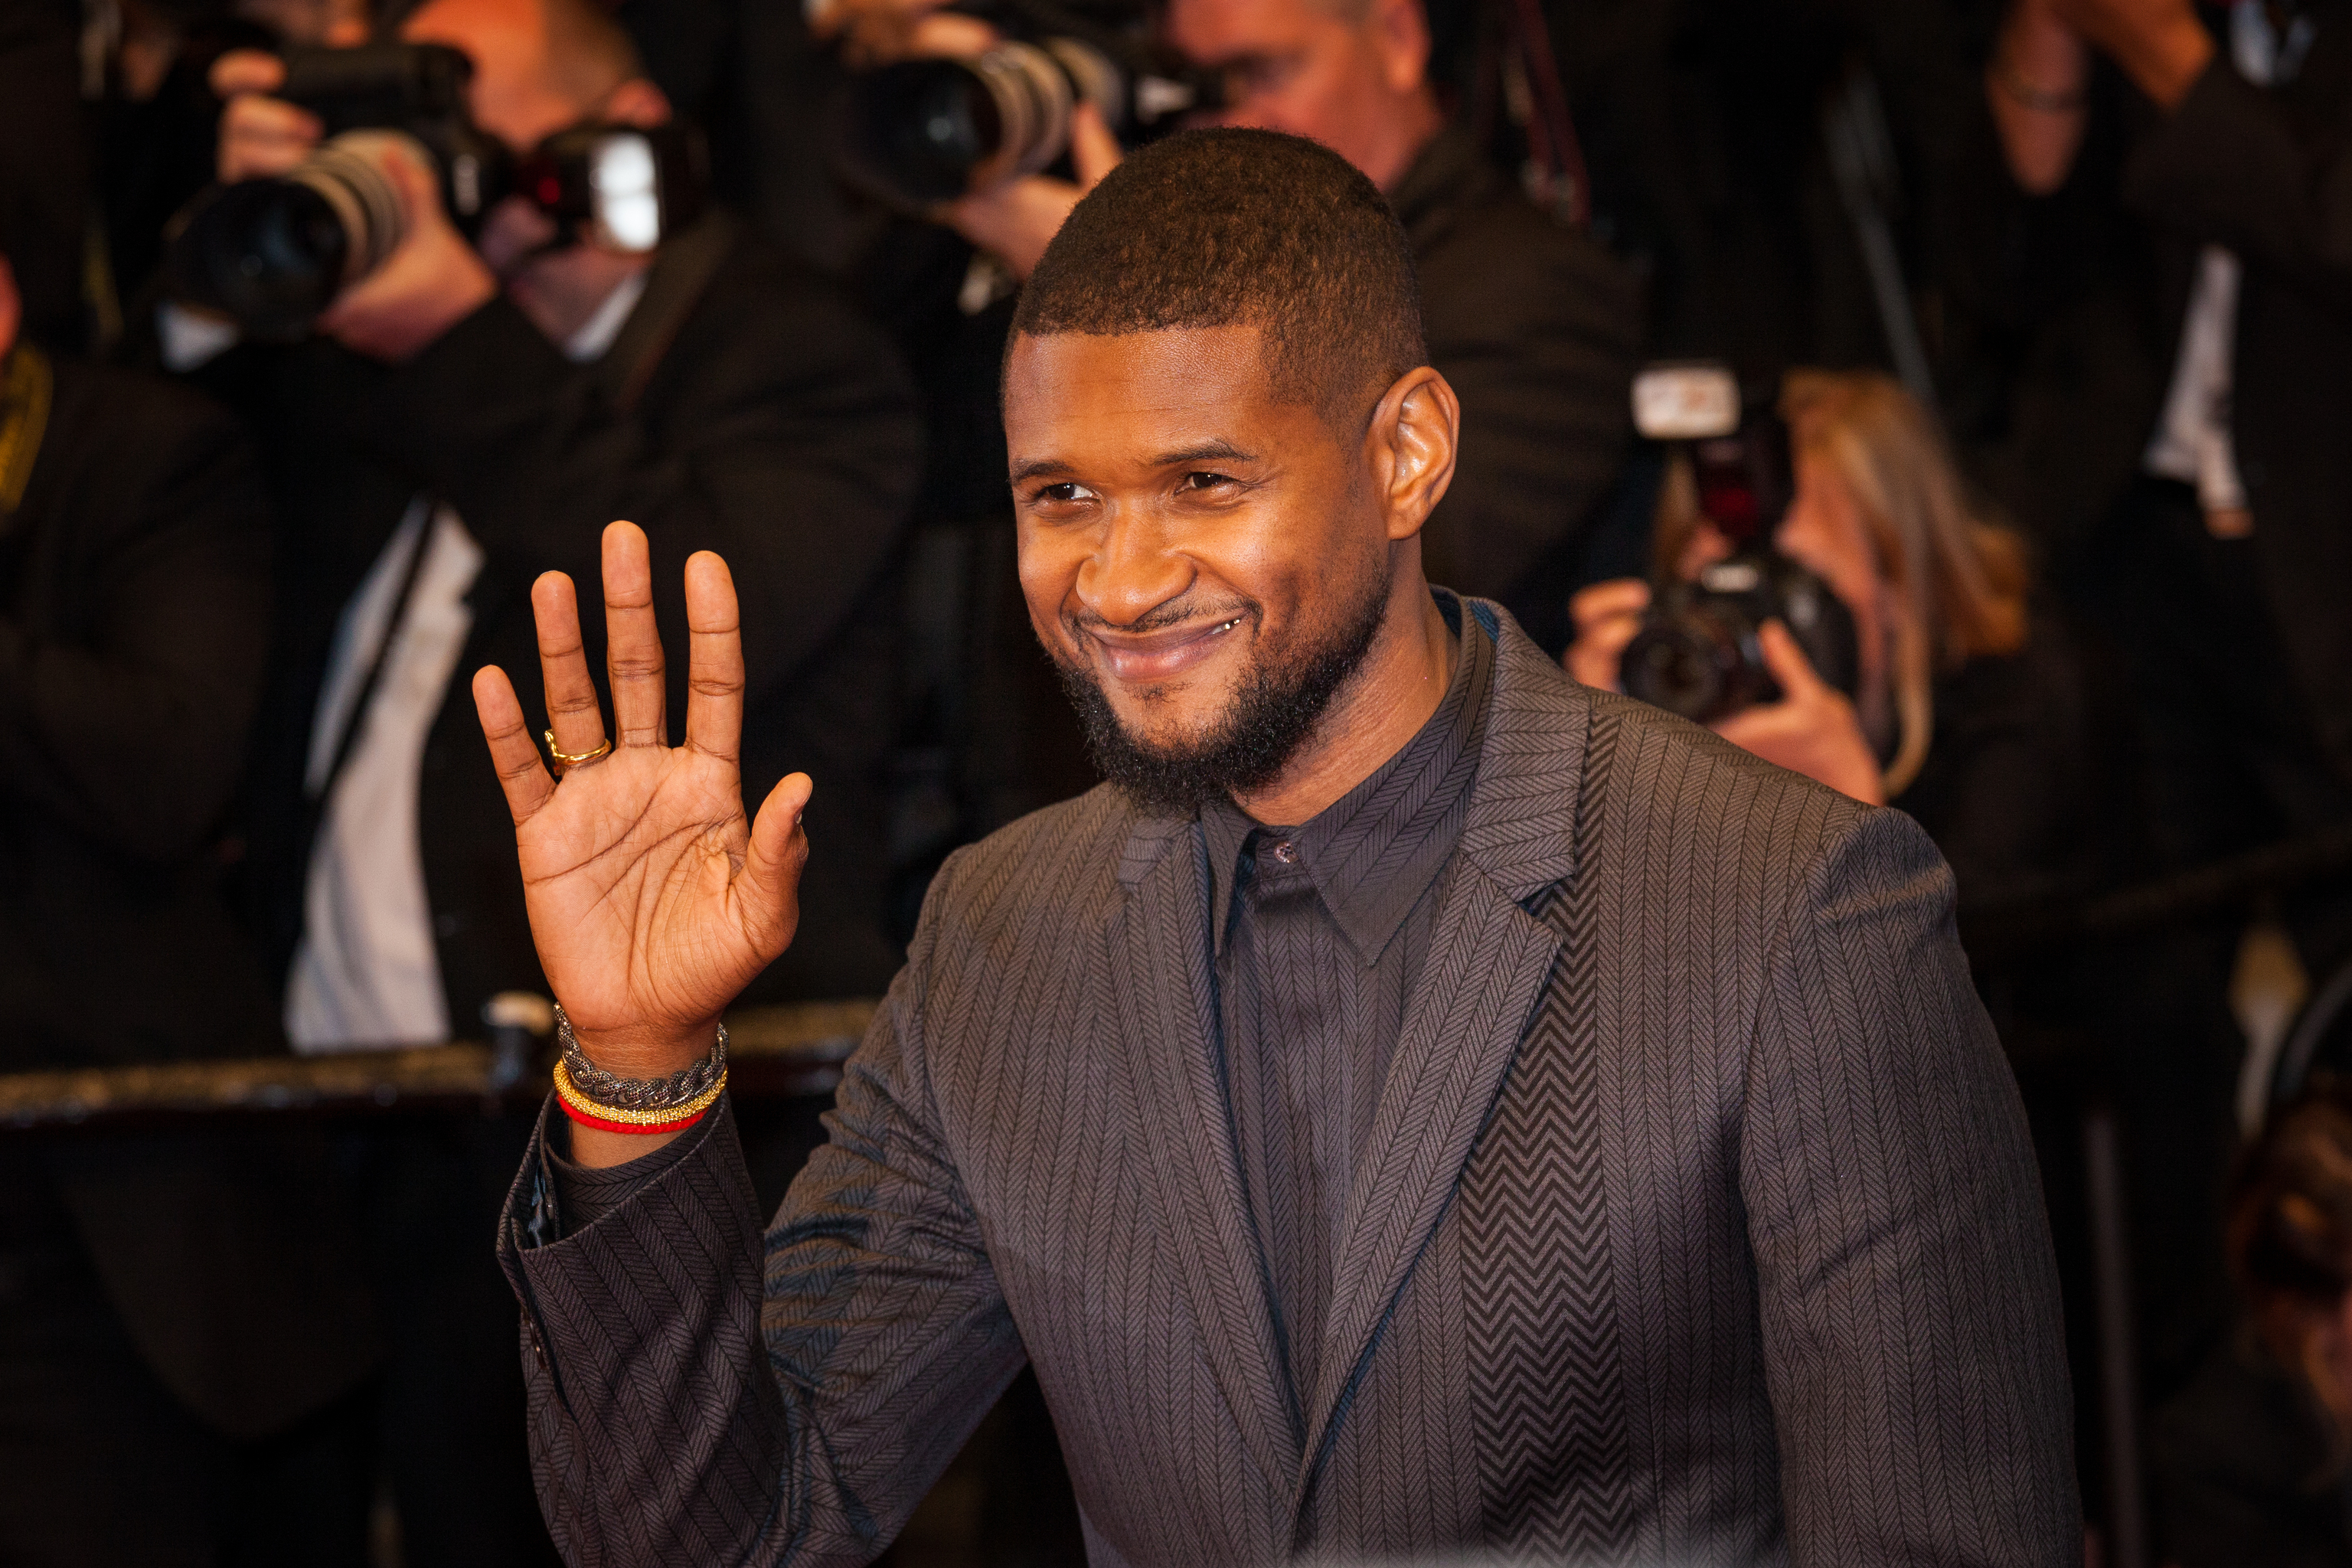 Usher attends the 69th Cannes Film Festival in 2016.